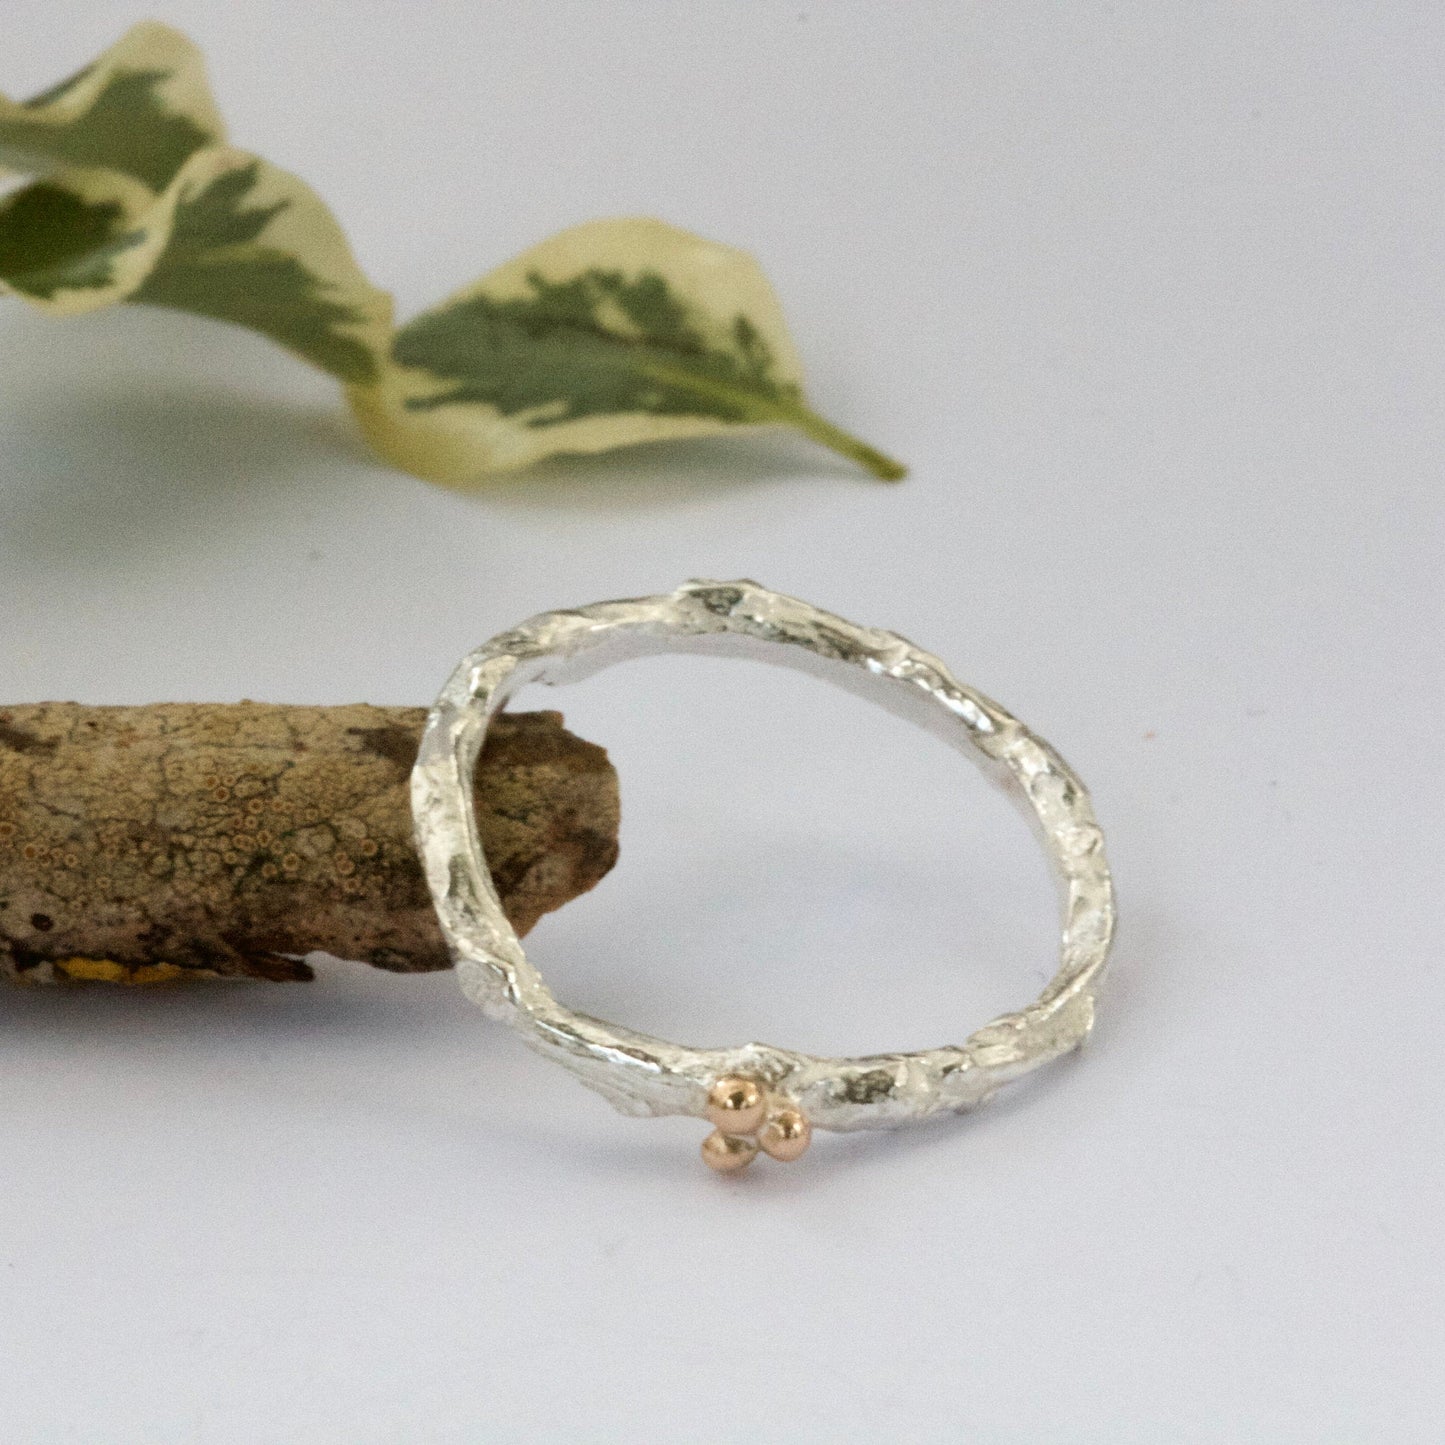 Silver and Gold Twig and Berry Shaped Wedding Ring, Rustic Wedding Ring